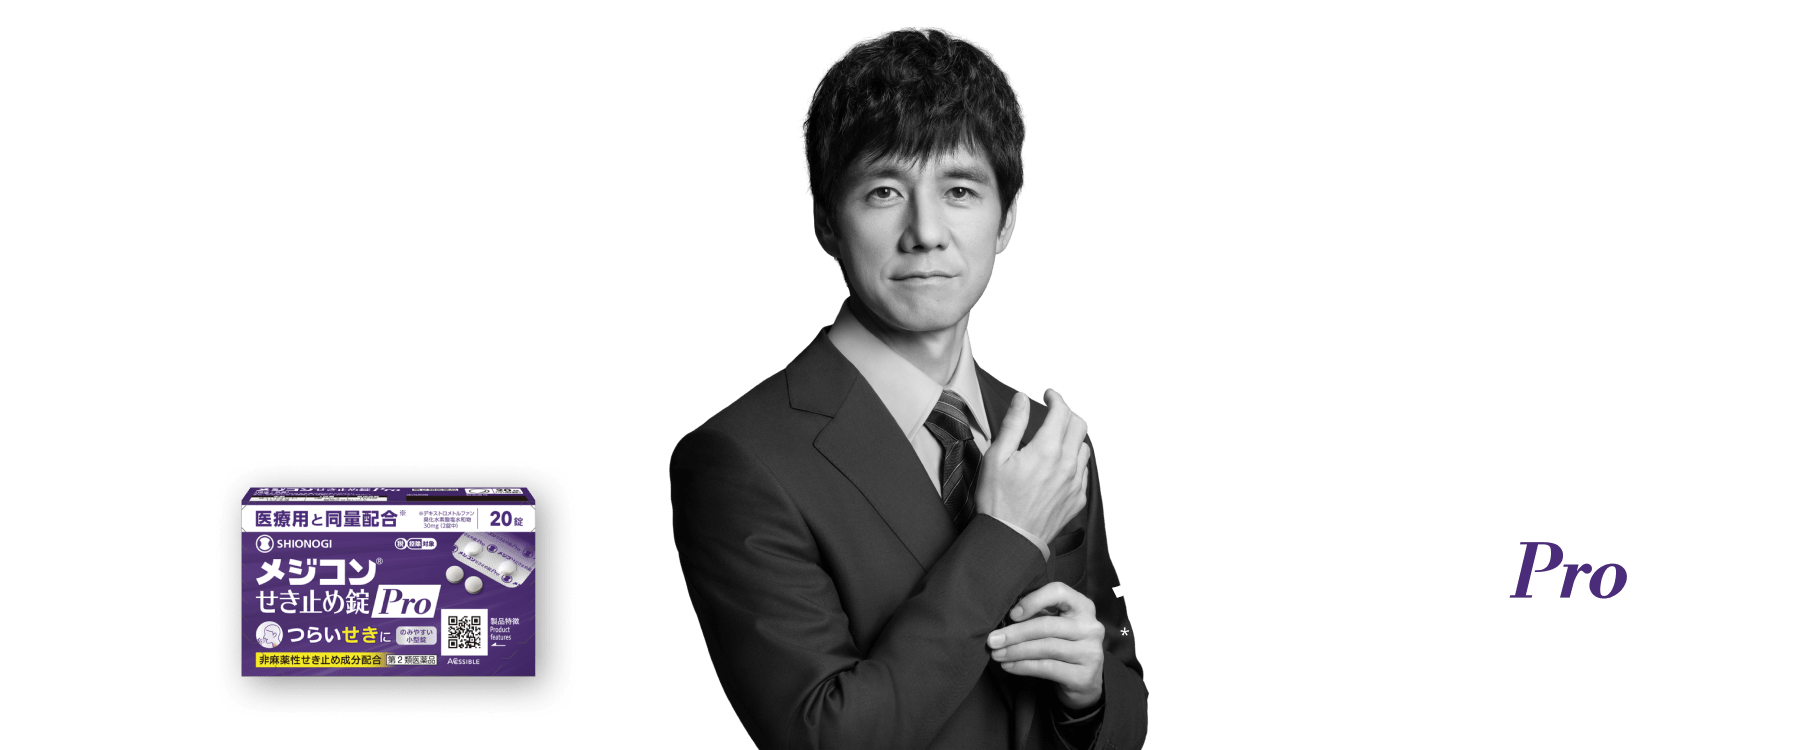 Use purple Pro for cough symptoms. This is because Pro contains the same amount of active ingredients as prescription-grade drugs. Medicon Cough Suppressant Tablets Pro * Contains 30 mg of dextromethorphan hydrobromide hydrate (in two tablets)